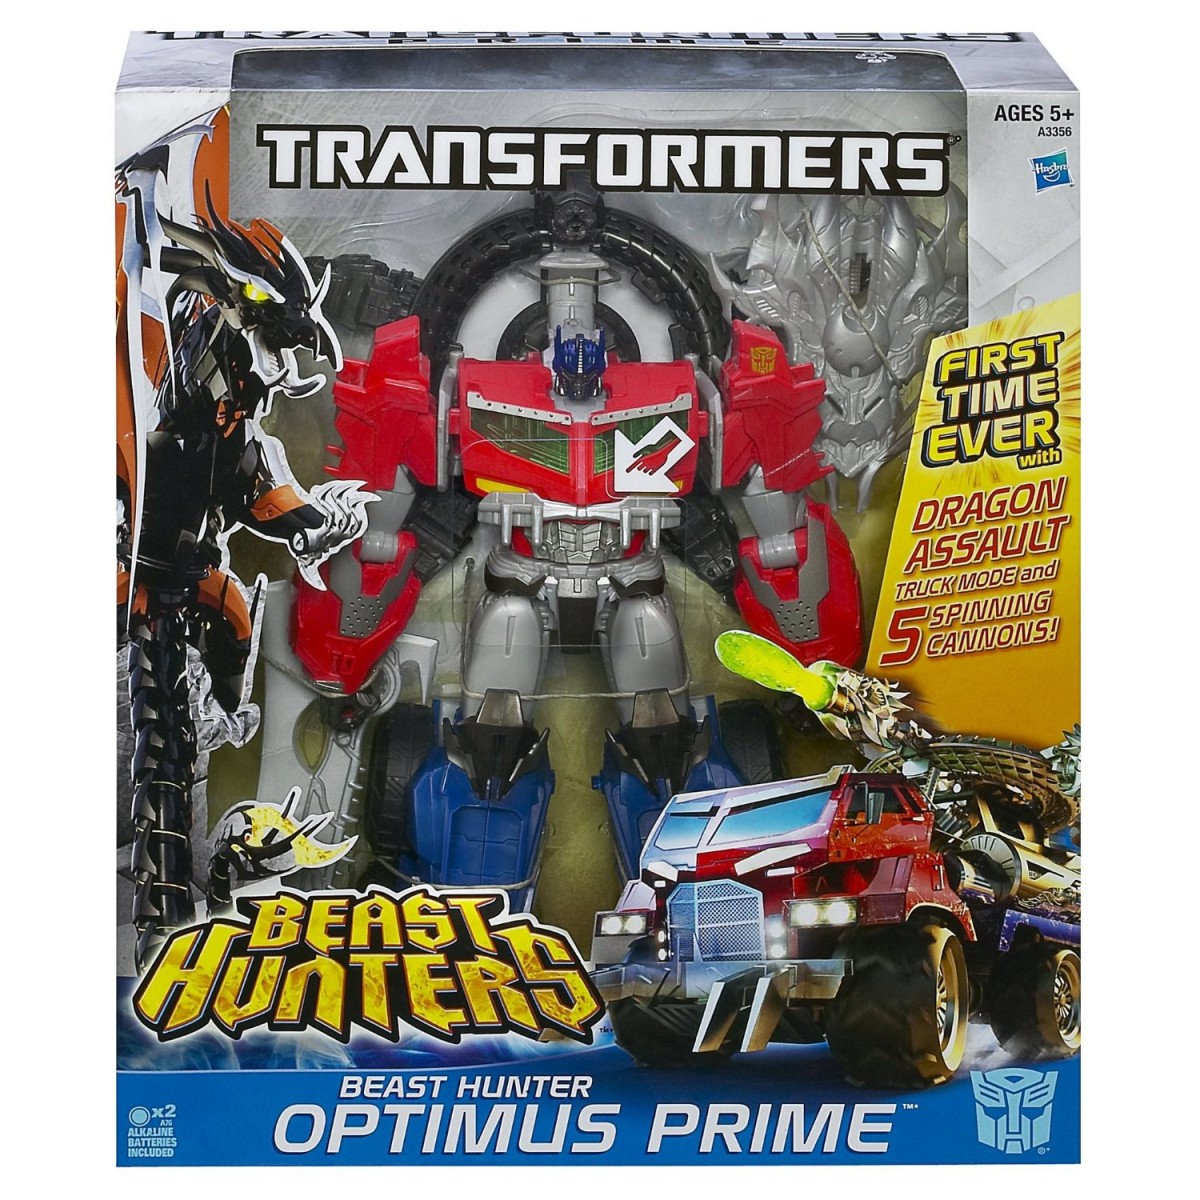 Transformers News: Beast Hunter Optimus Prime (Supreme/Ultimate Class) Available @ Amazon For $18.00!